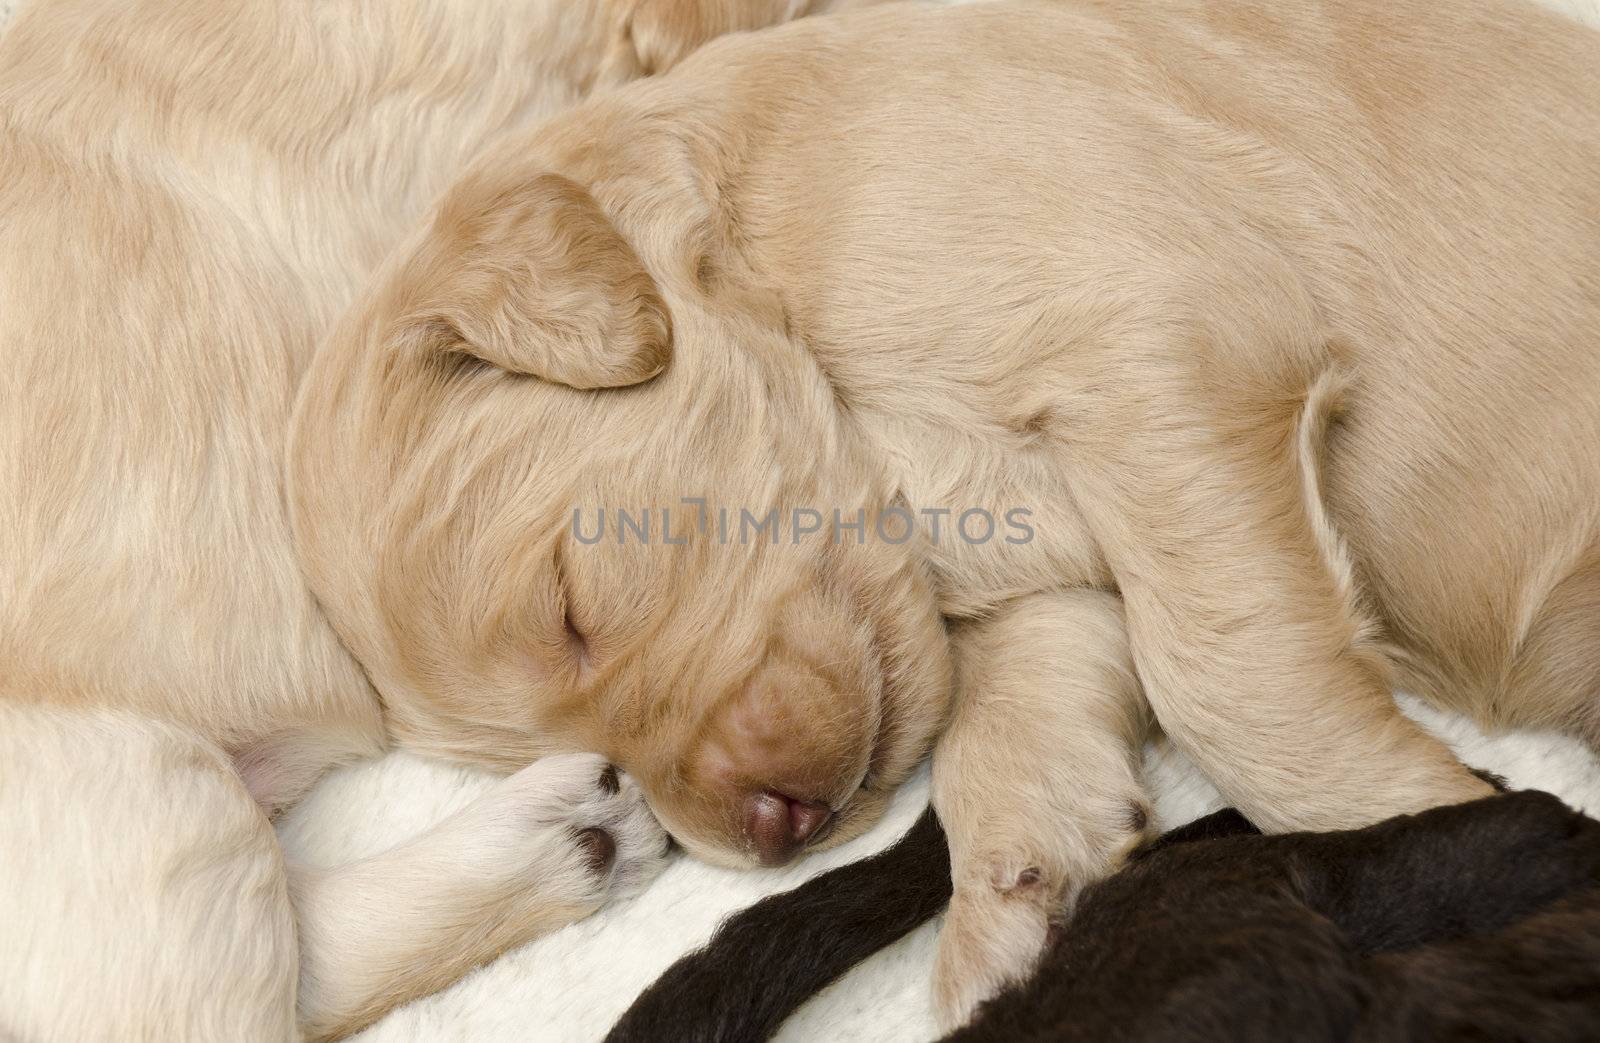 Selective focus the carmel labradoodle pup, sleeping with his siblings